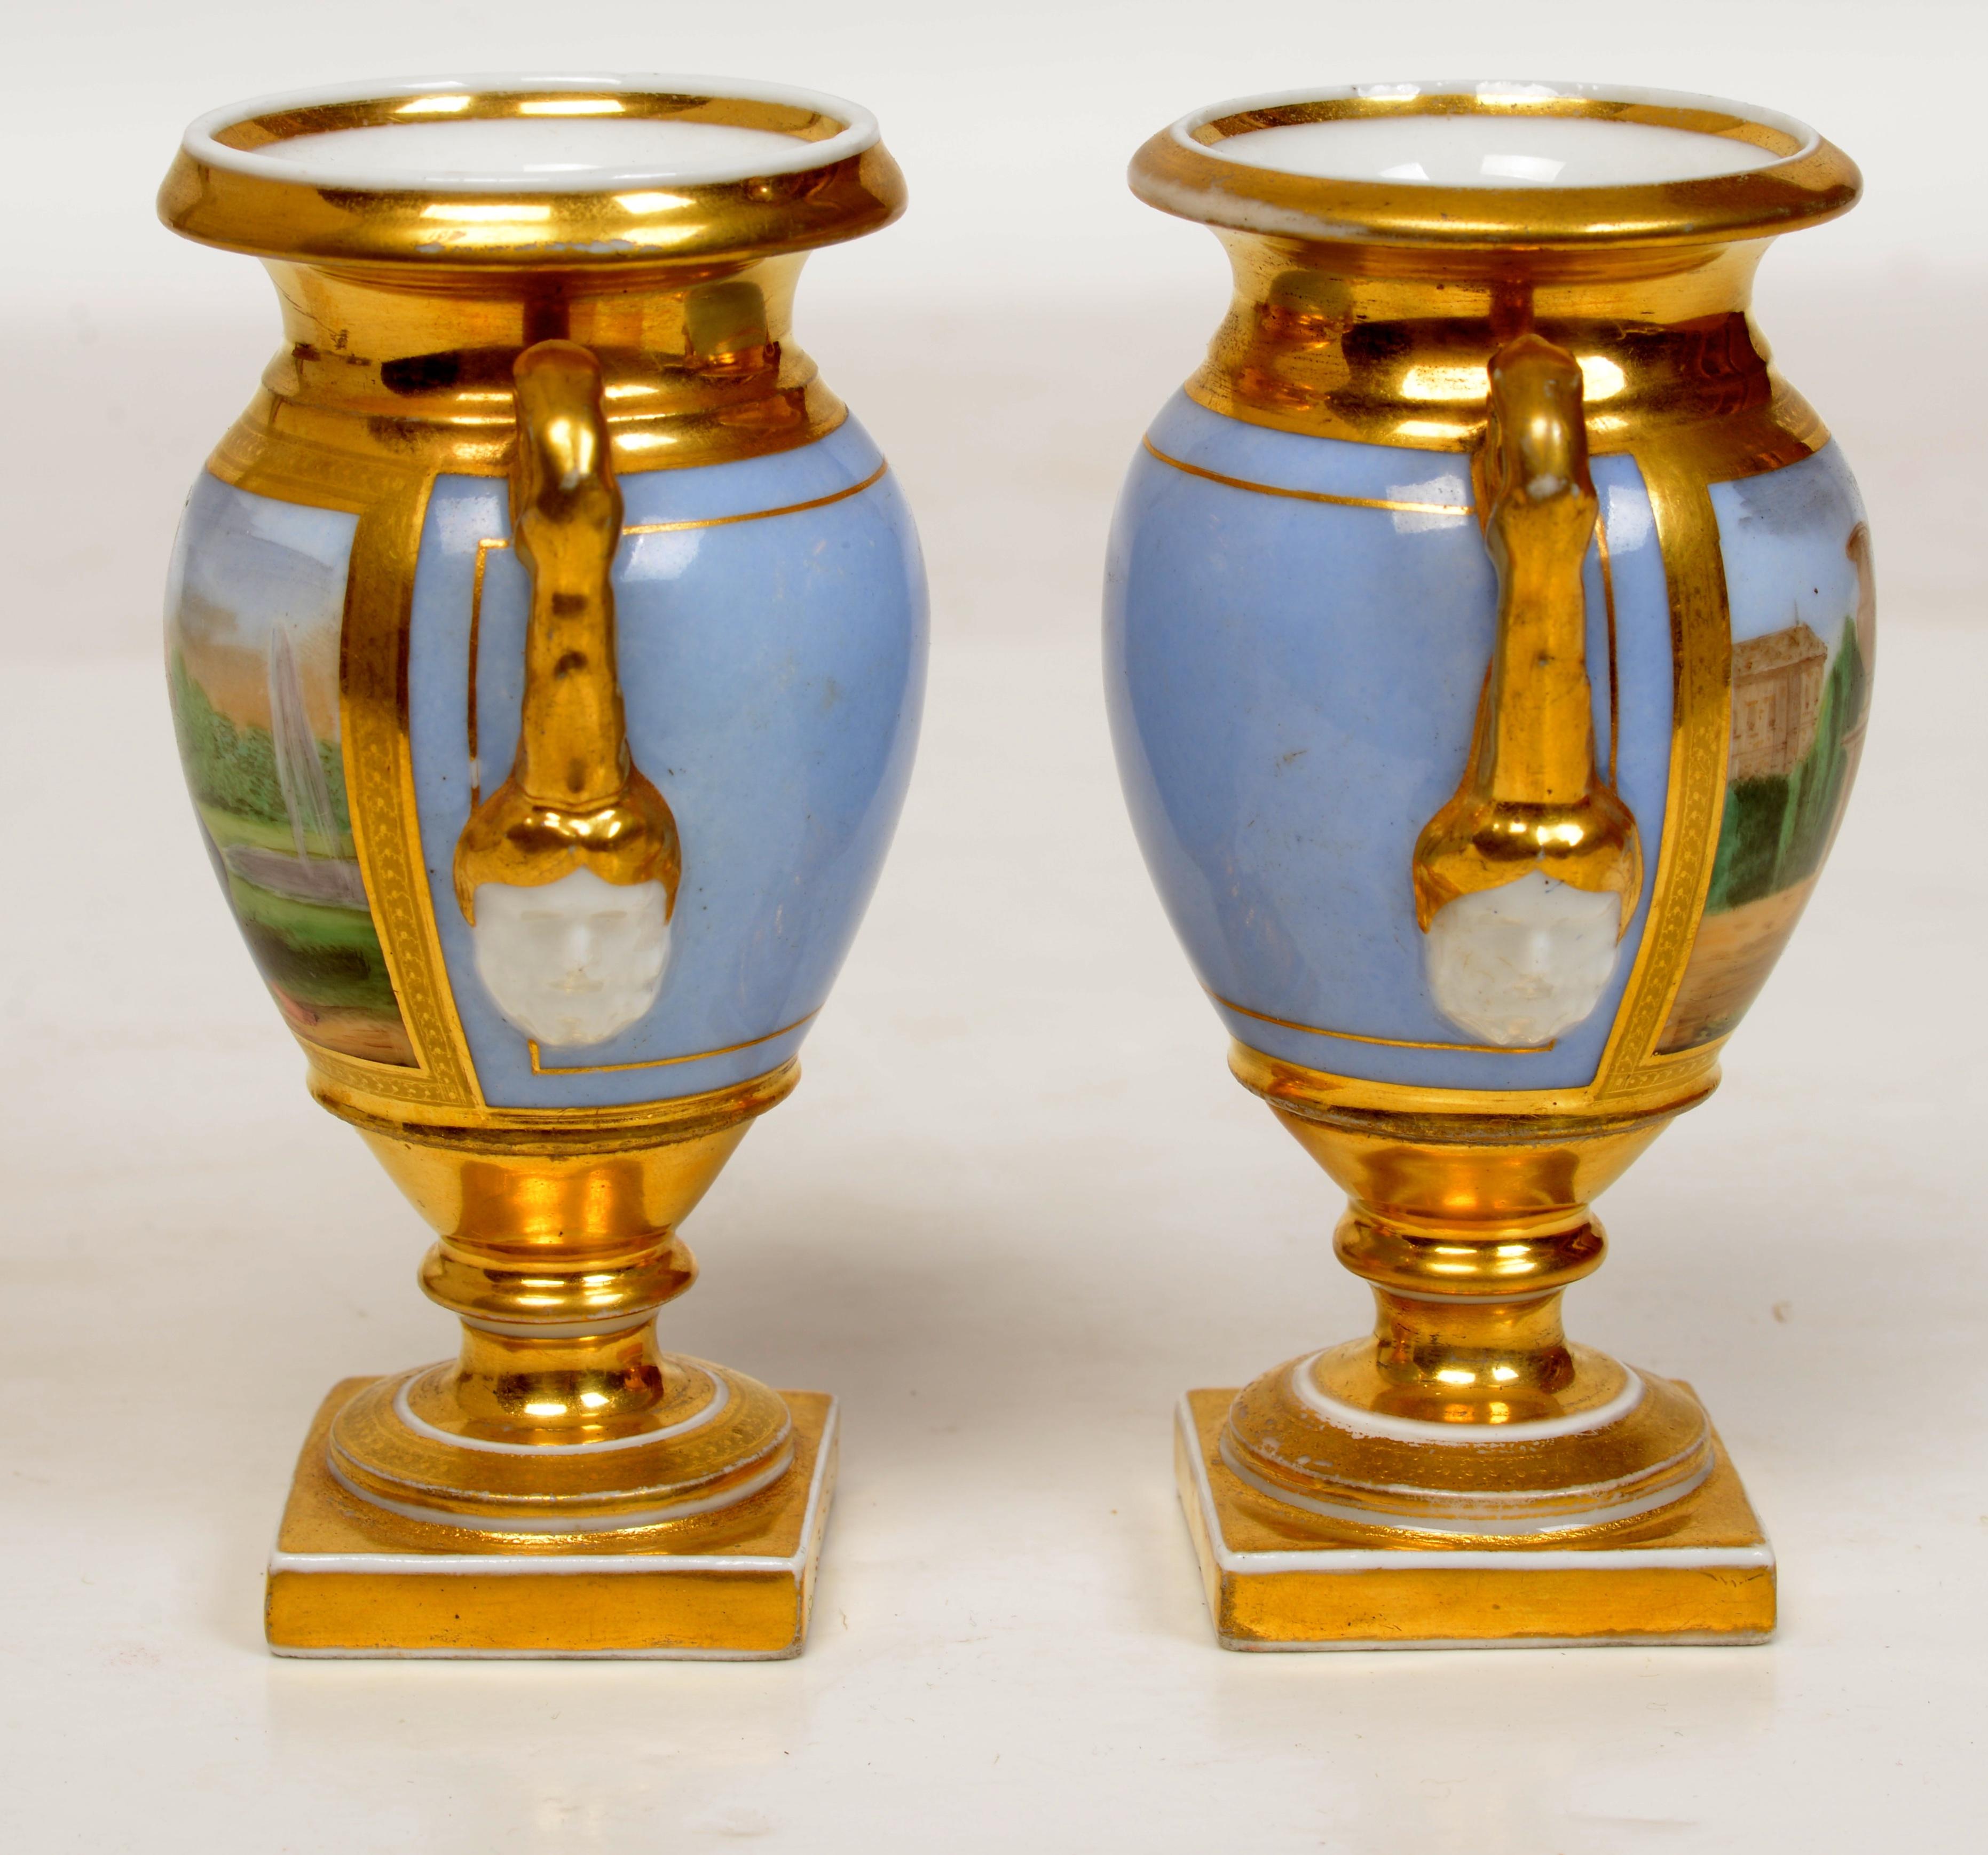 French Pr. of Old Paris Miniature, Gilt Decorated Footed Urns With Garden Scenes, c1800 For Sale